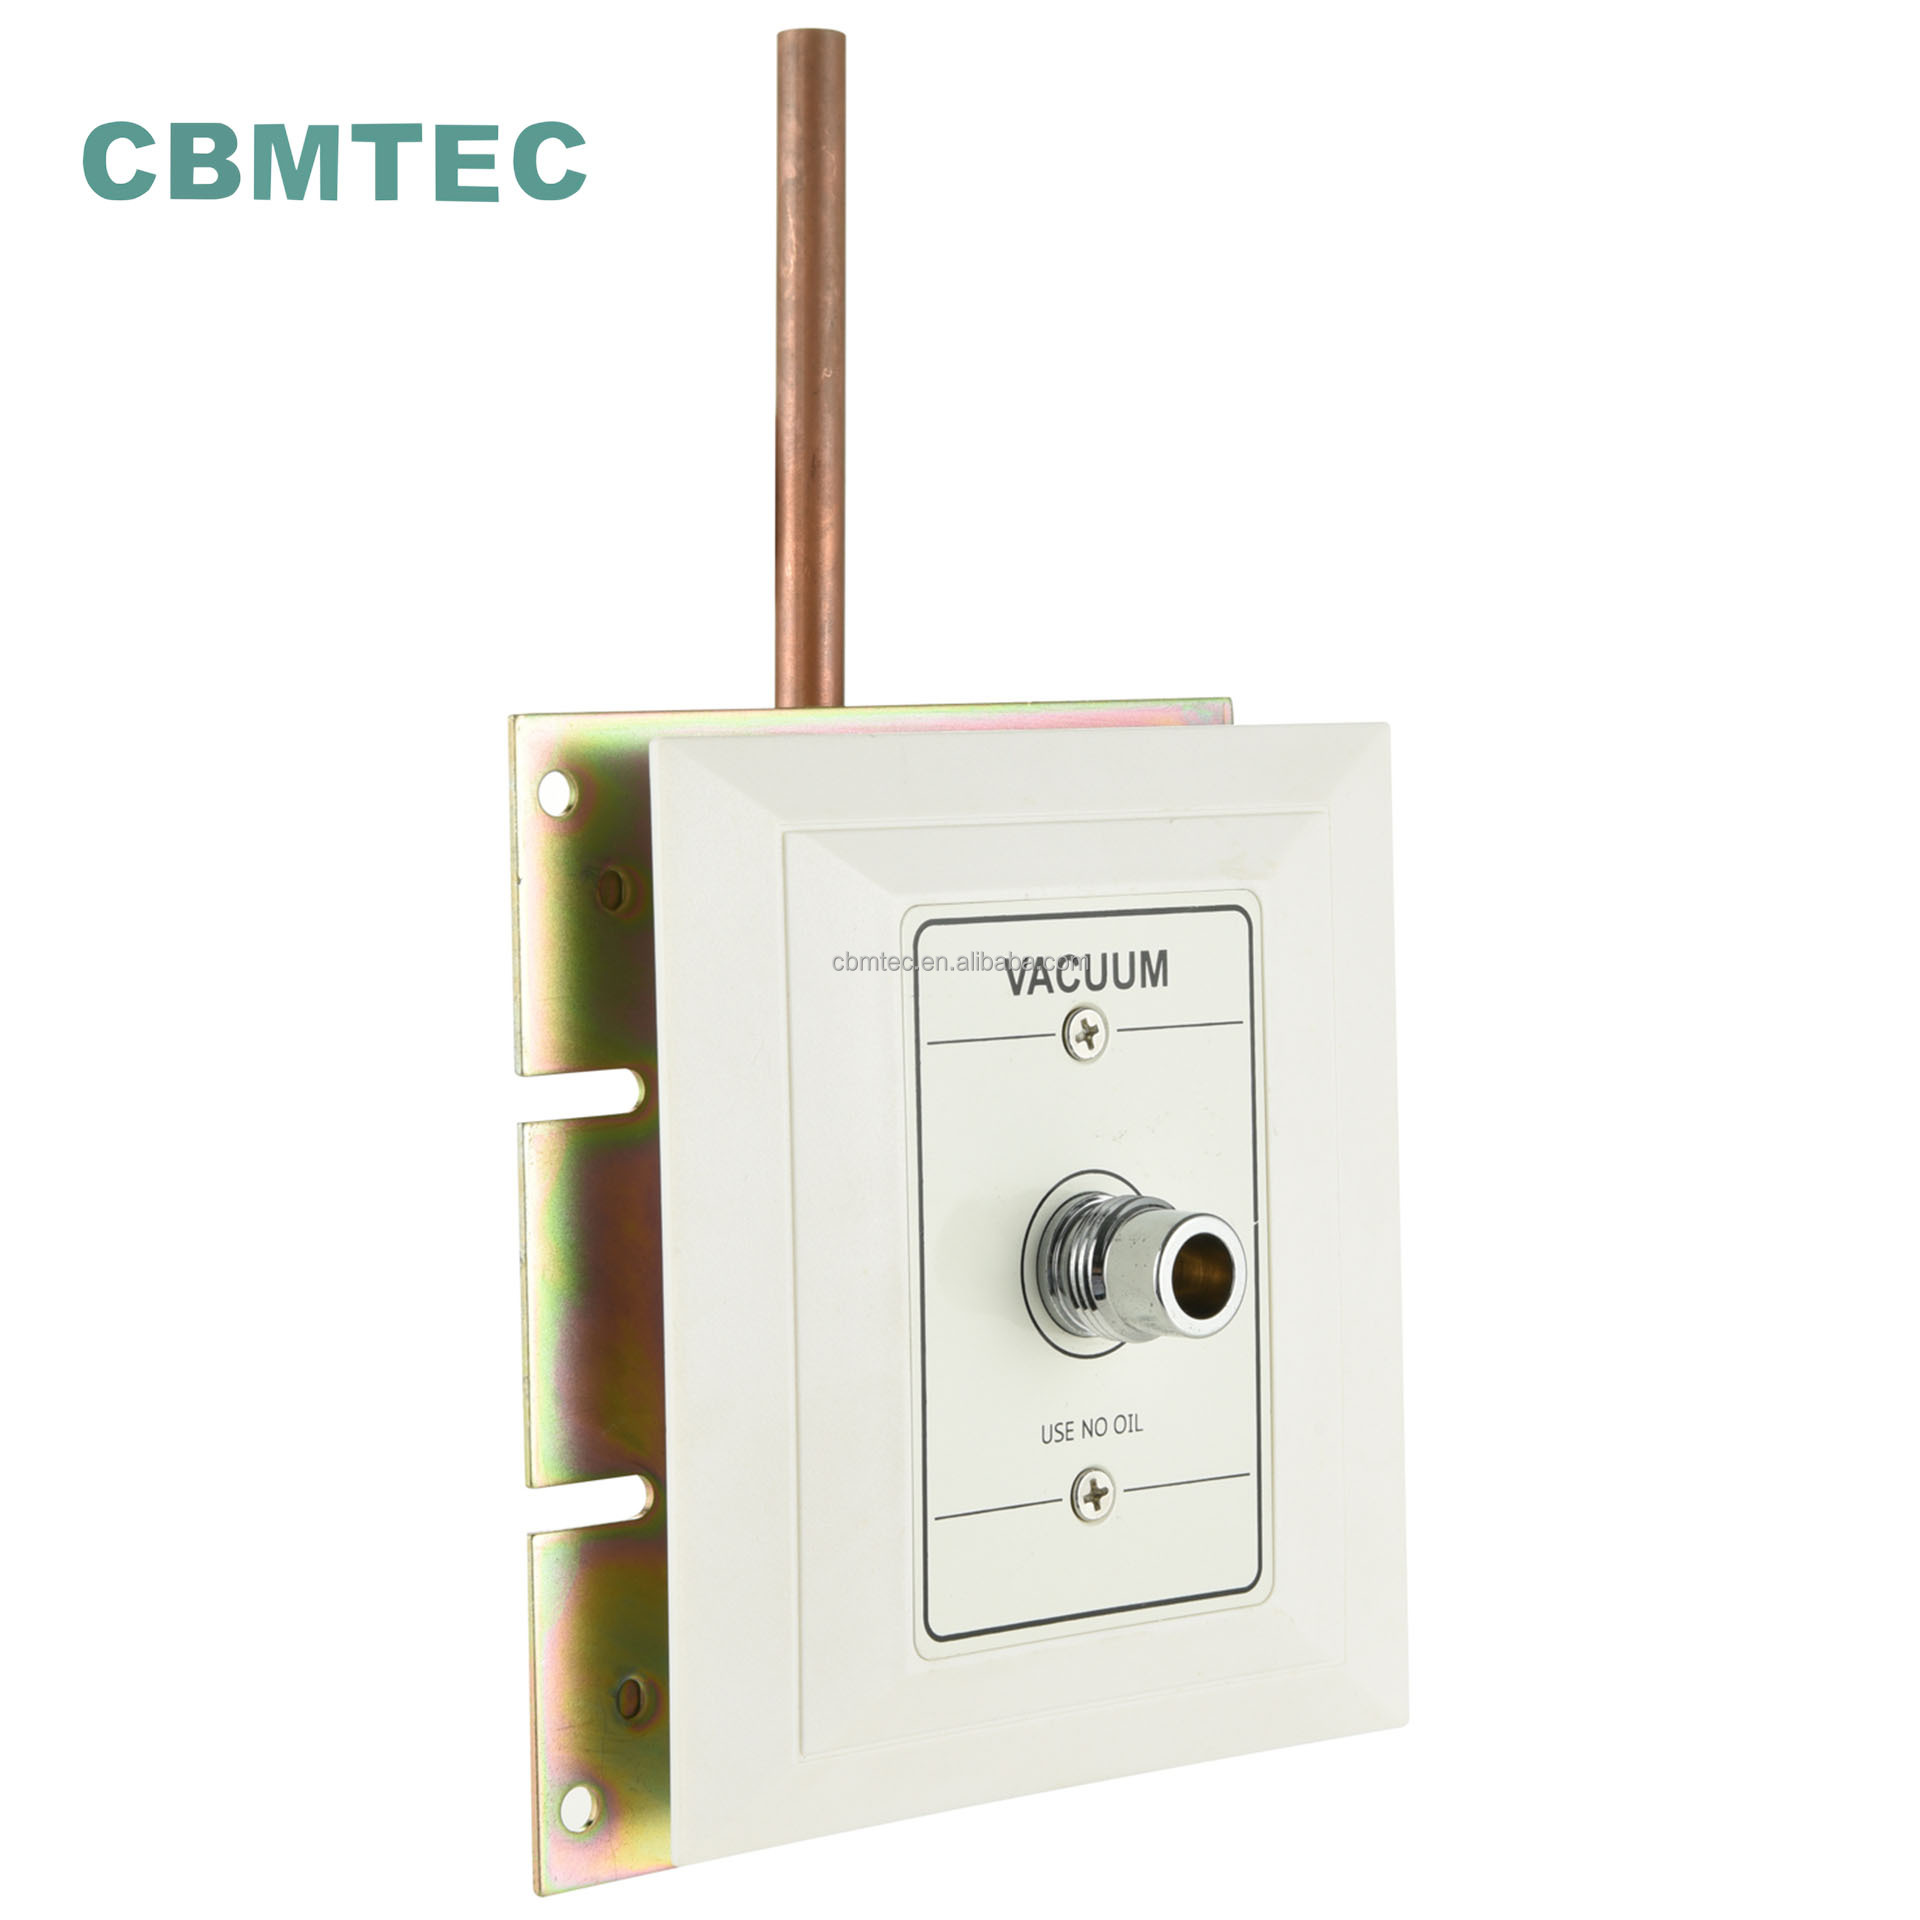 CBMTEC American Standard Medical Gas Outlets